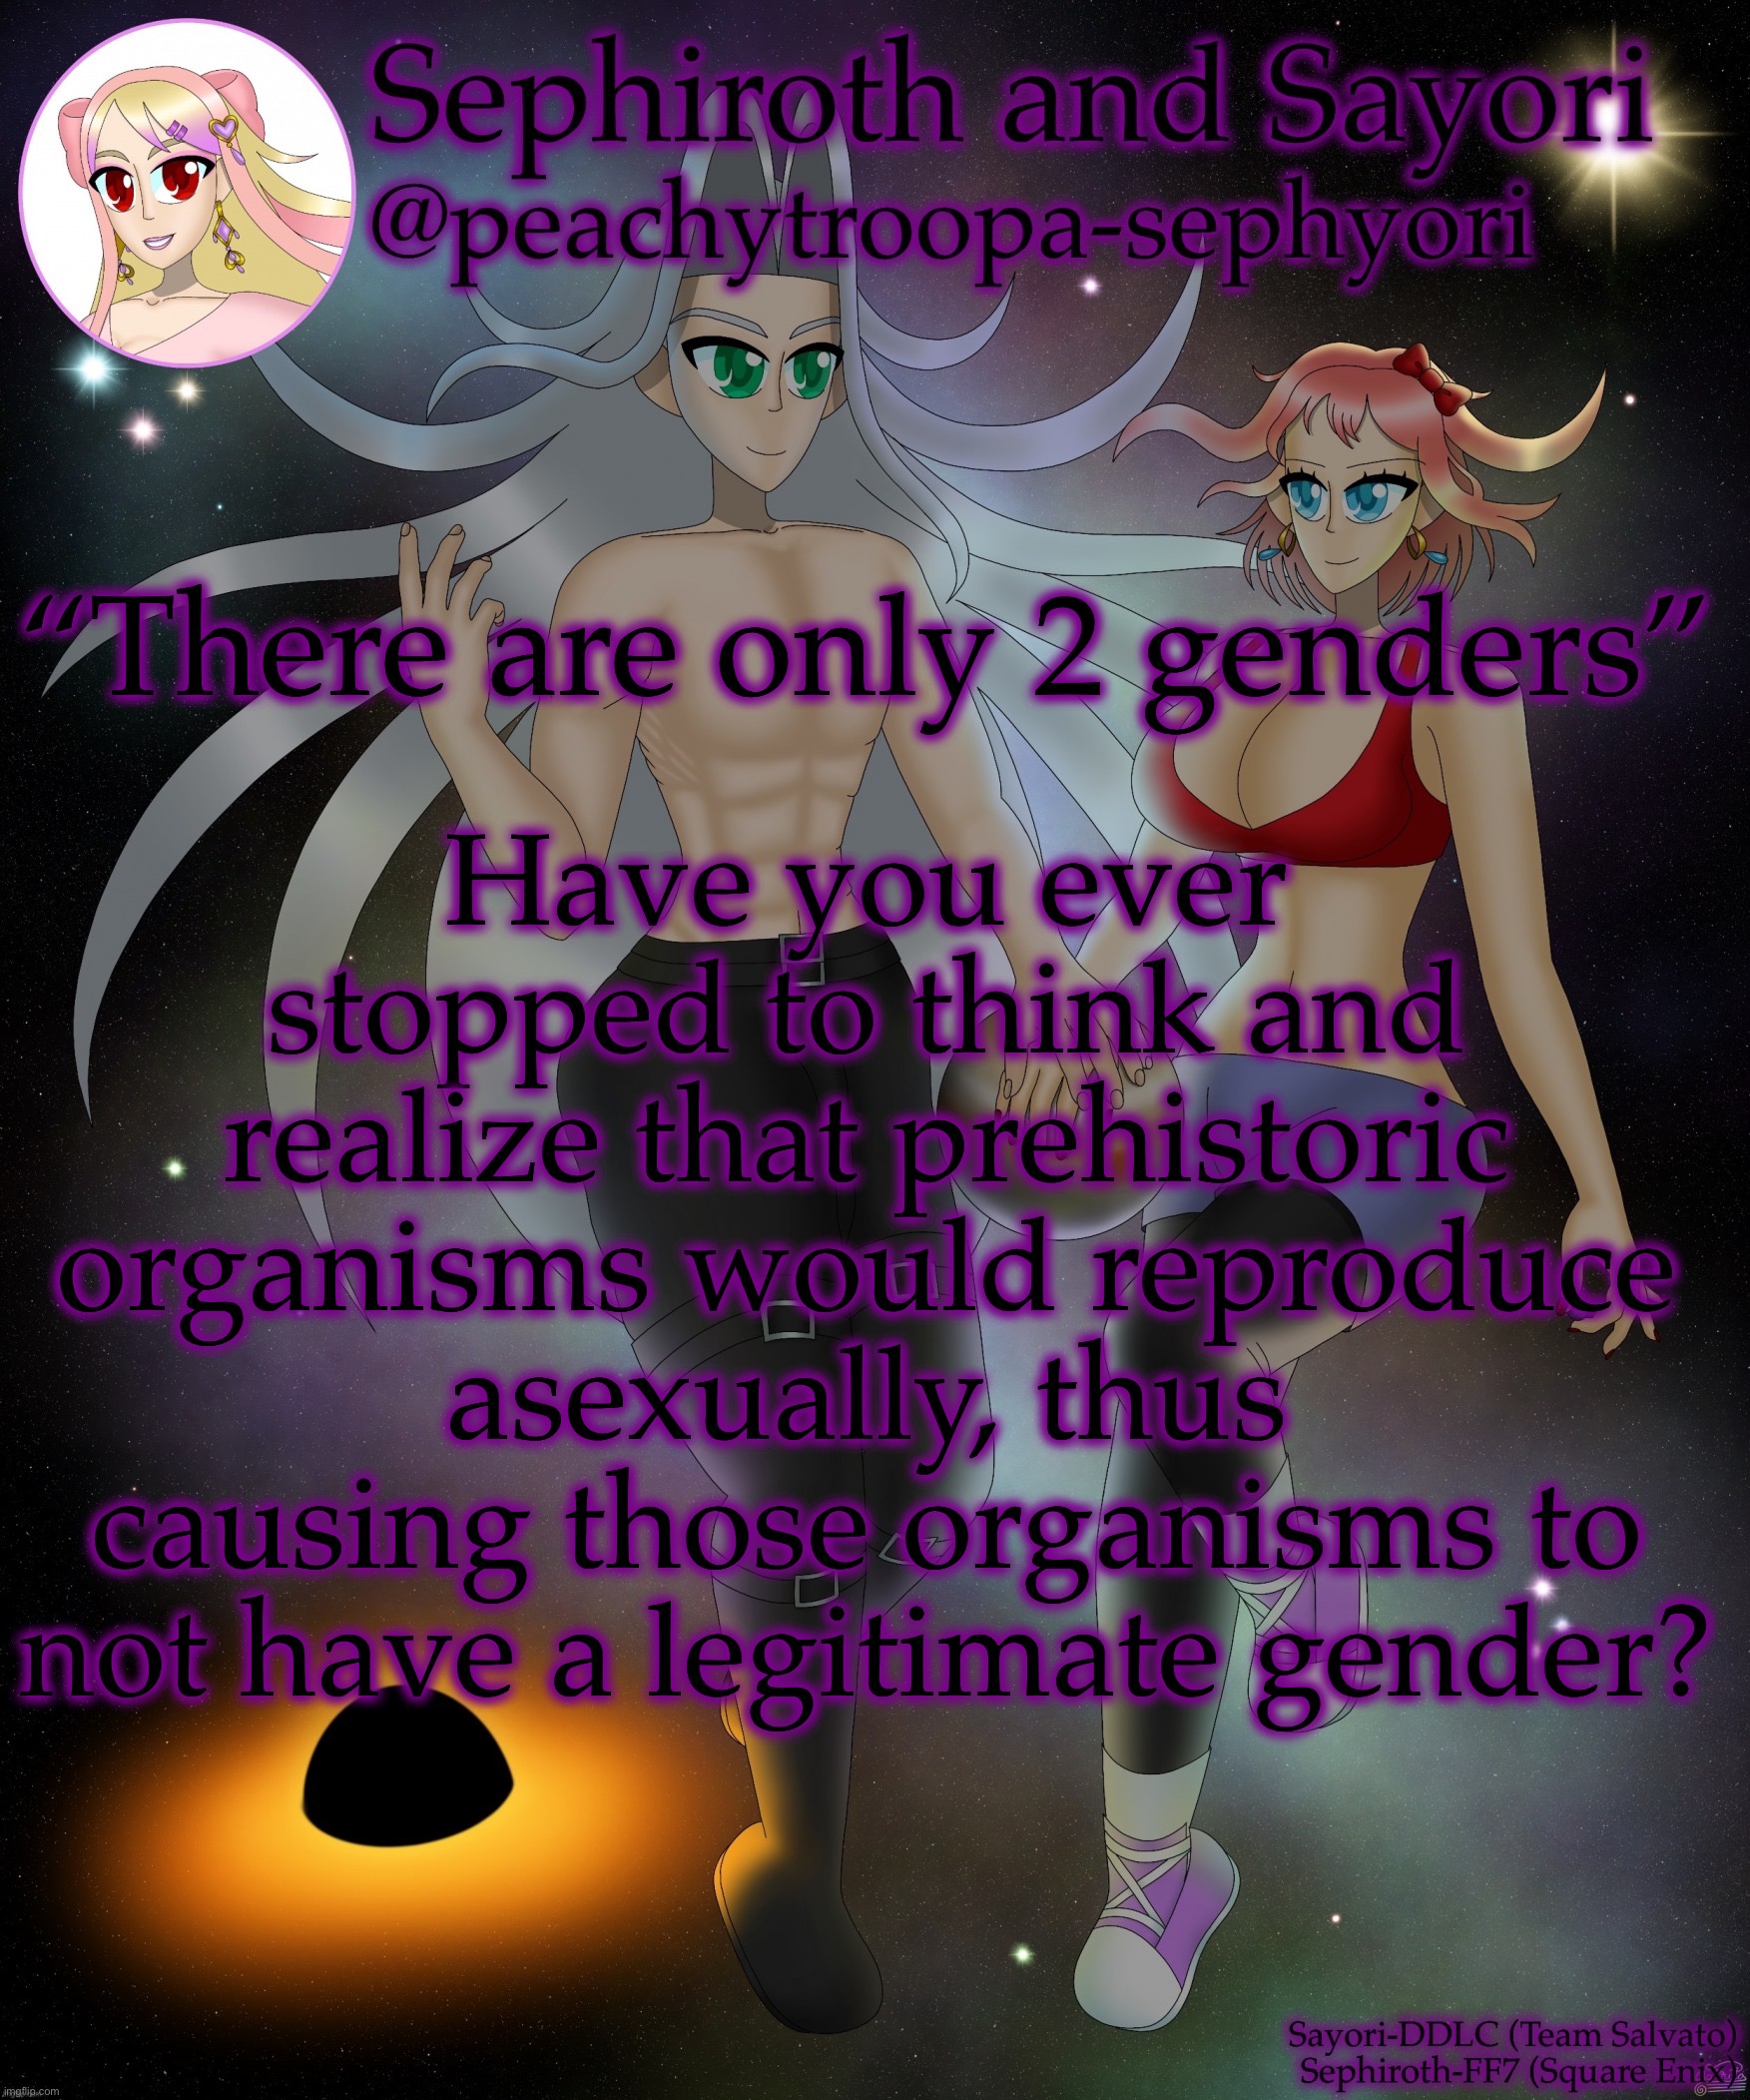 I’ll probably get cancelled for this half joke | Have you ever stopped to think and realize that prehistoric organisms would reproduce asexually, thus causing those organisms to not have a legitimate gender? “There are only 2 genders” | image tagged in sayori and sephiroth | made w/ Imgflip meme maker